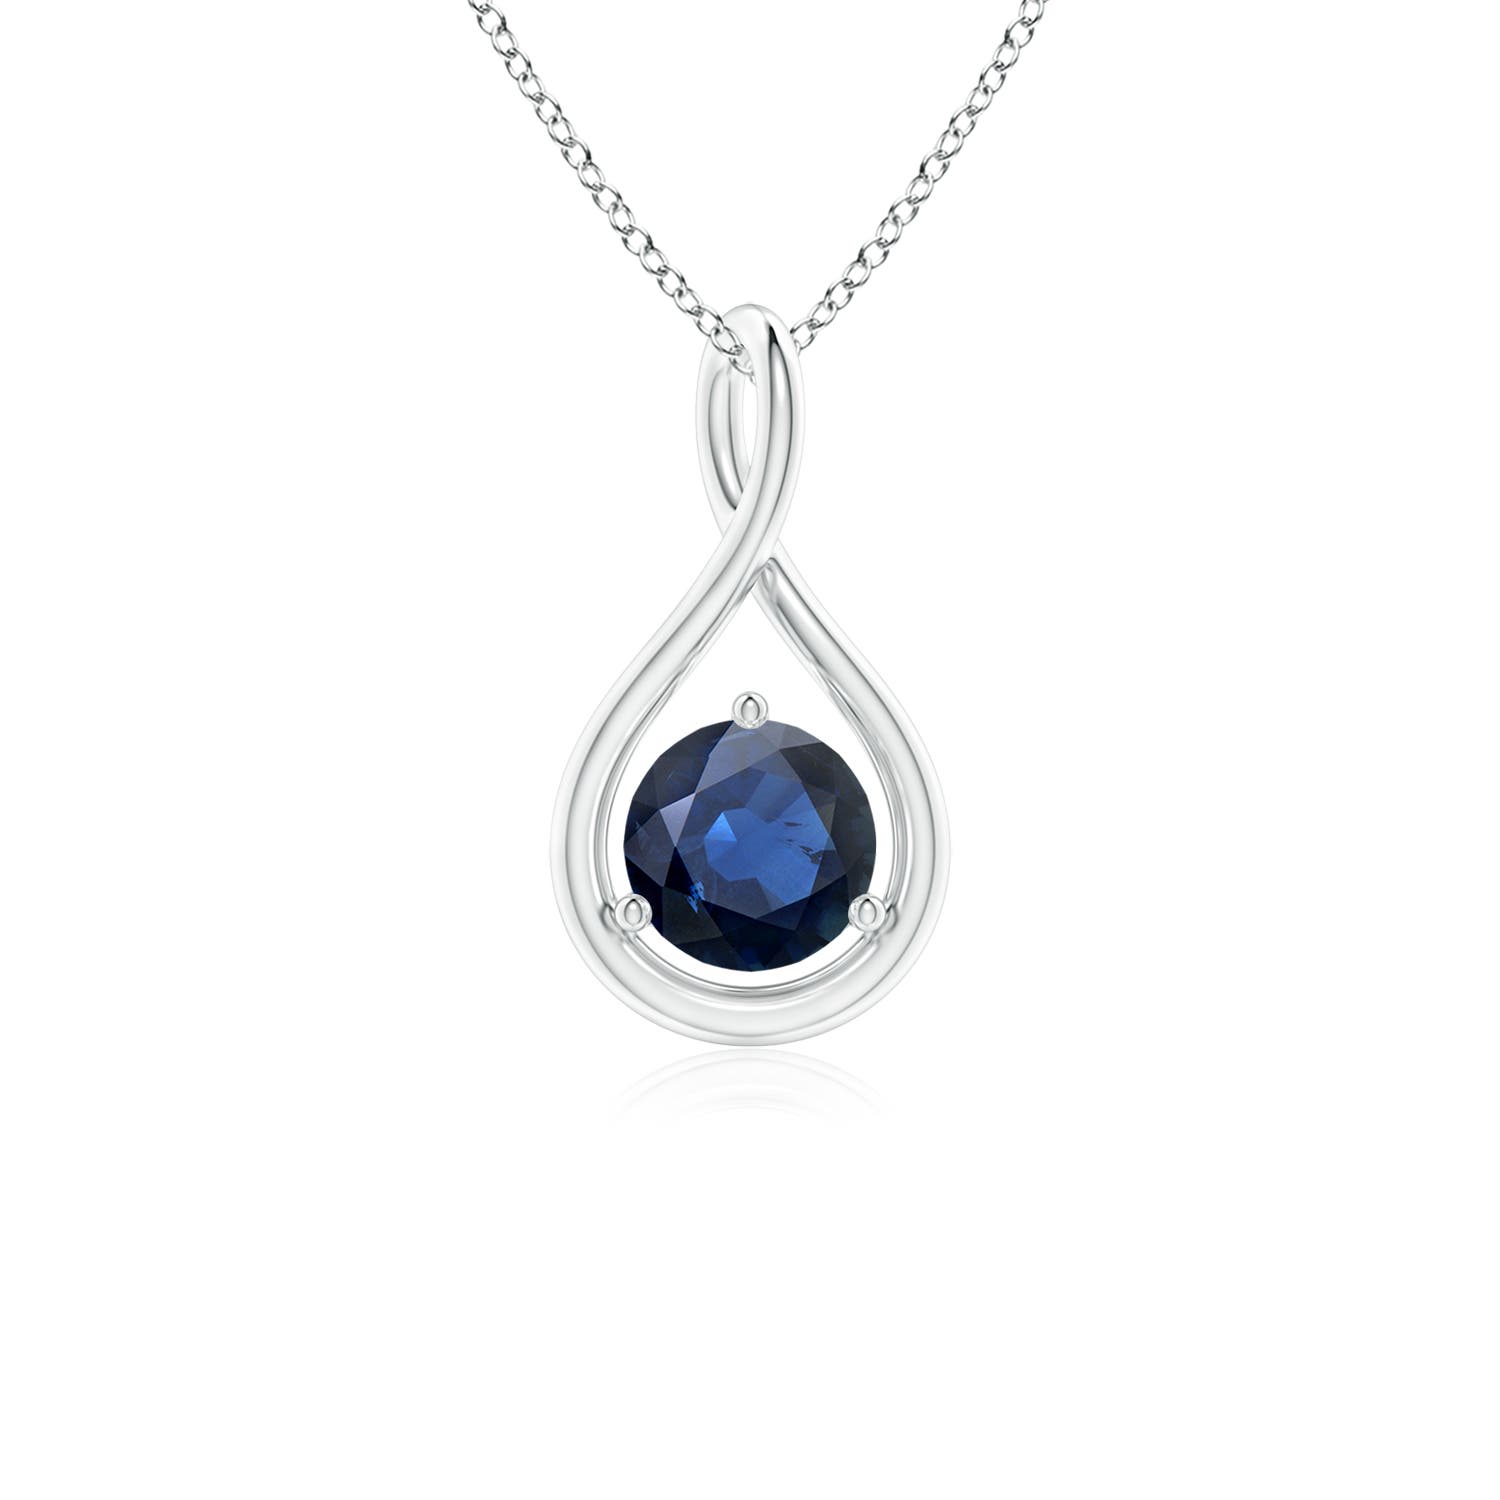 AA - Blue Sapphire / 0.6 CT / 14 KT White Gold